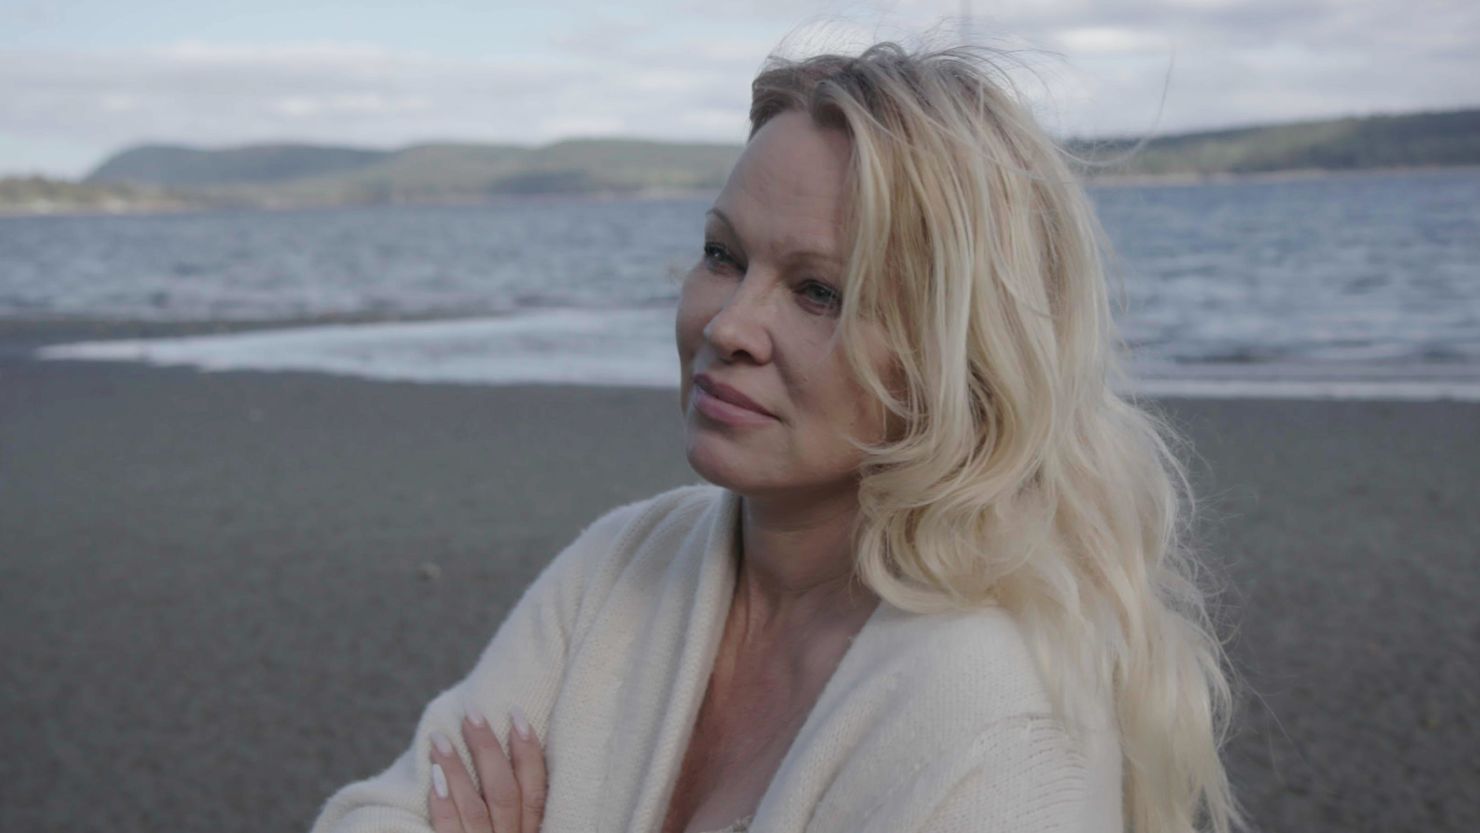 Pamela Anderson opens up in the Netflix documentary "Pamela, a love story."